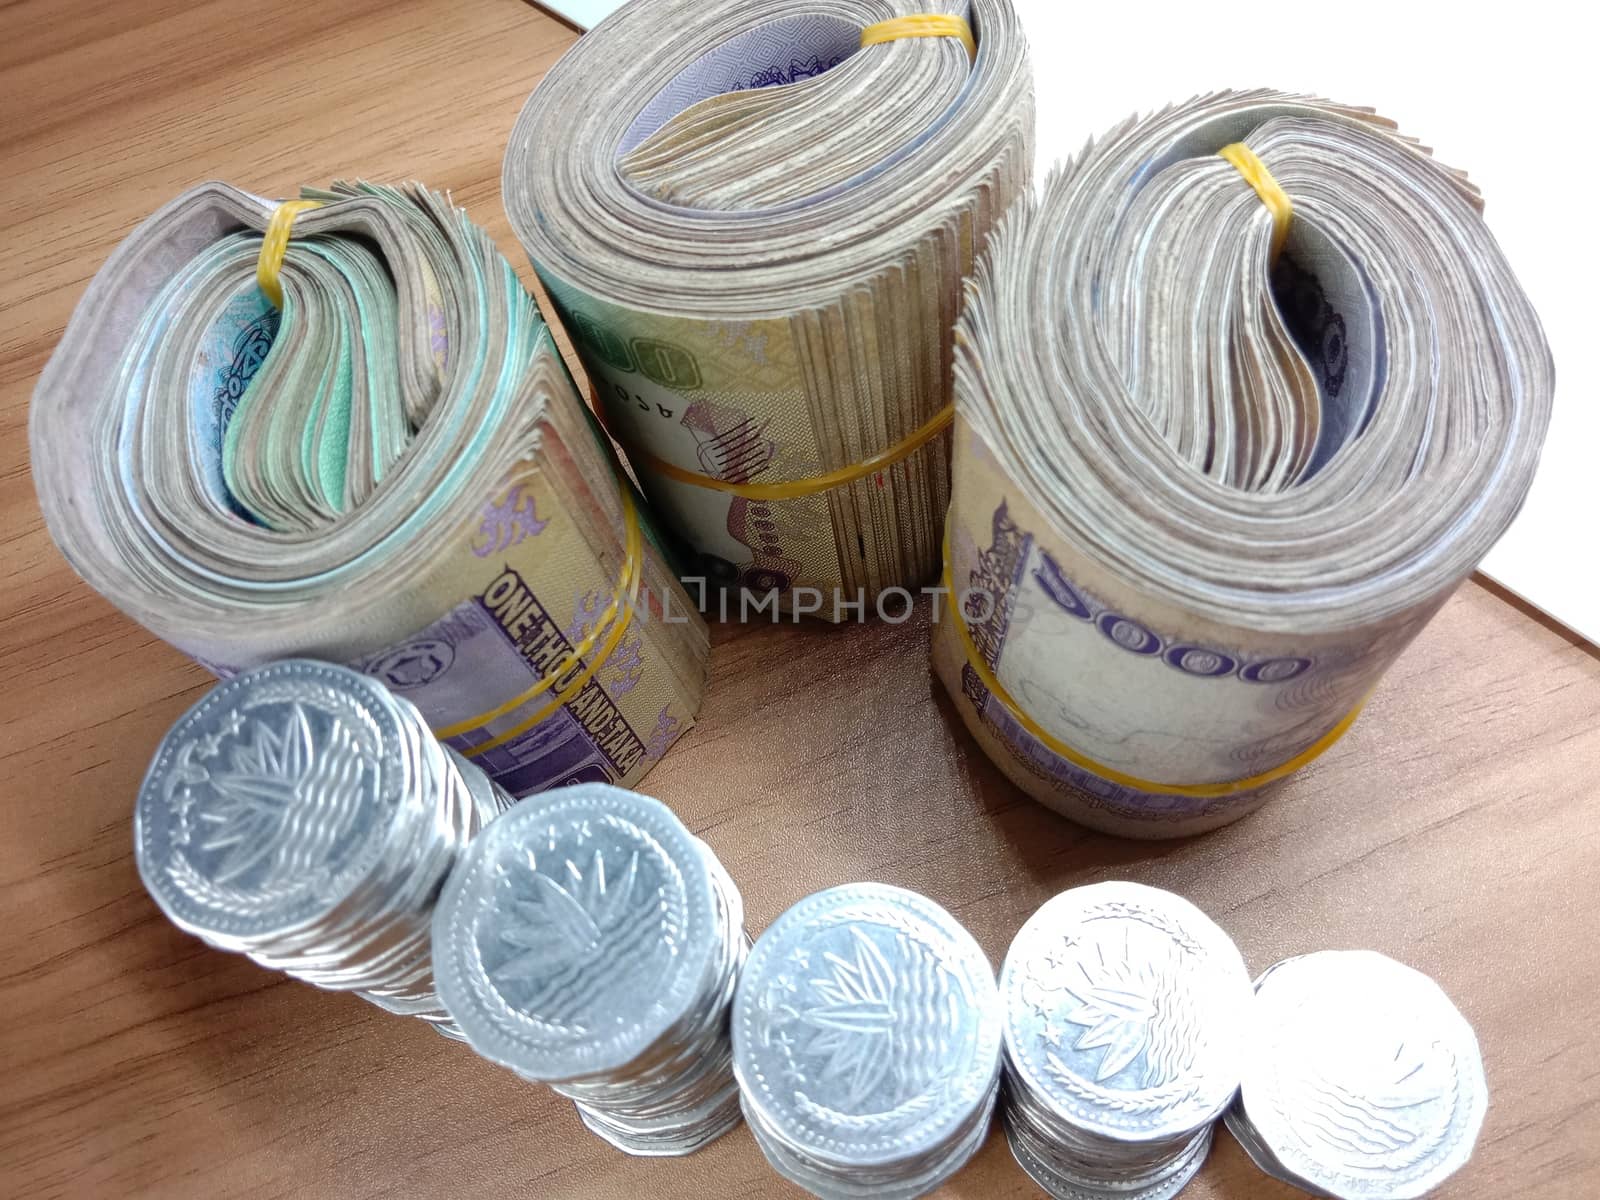 Bangladeshi bank note bundle and coin on white background